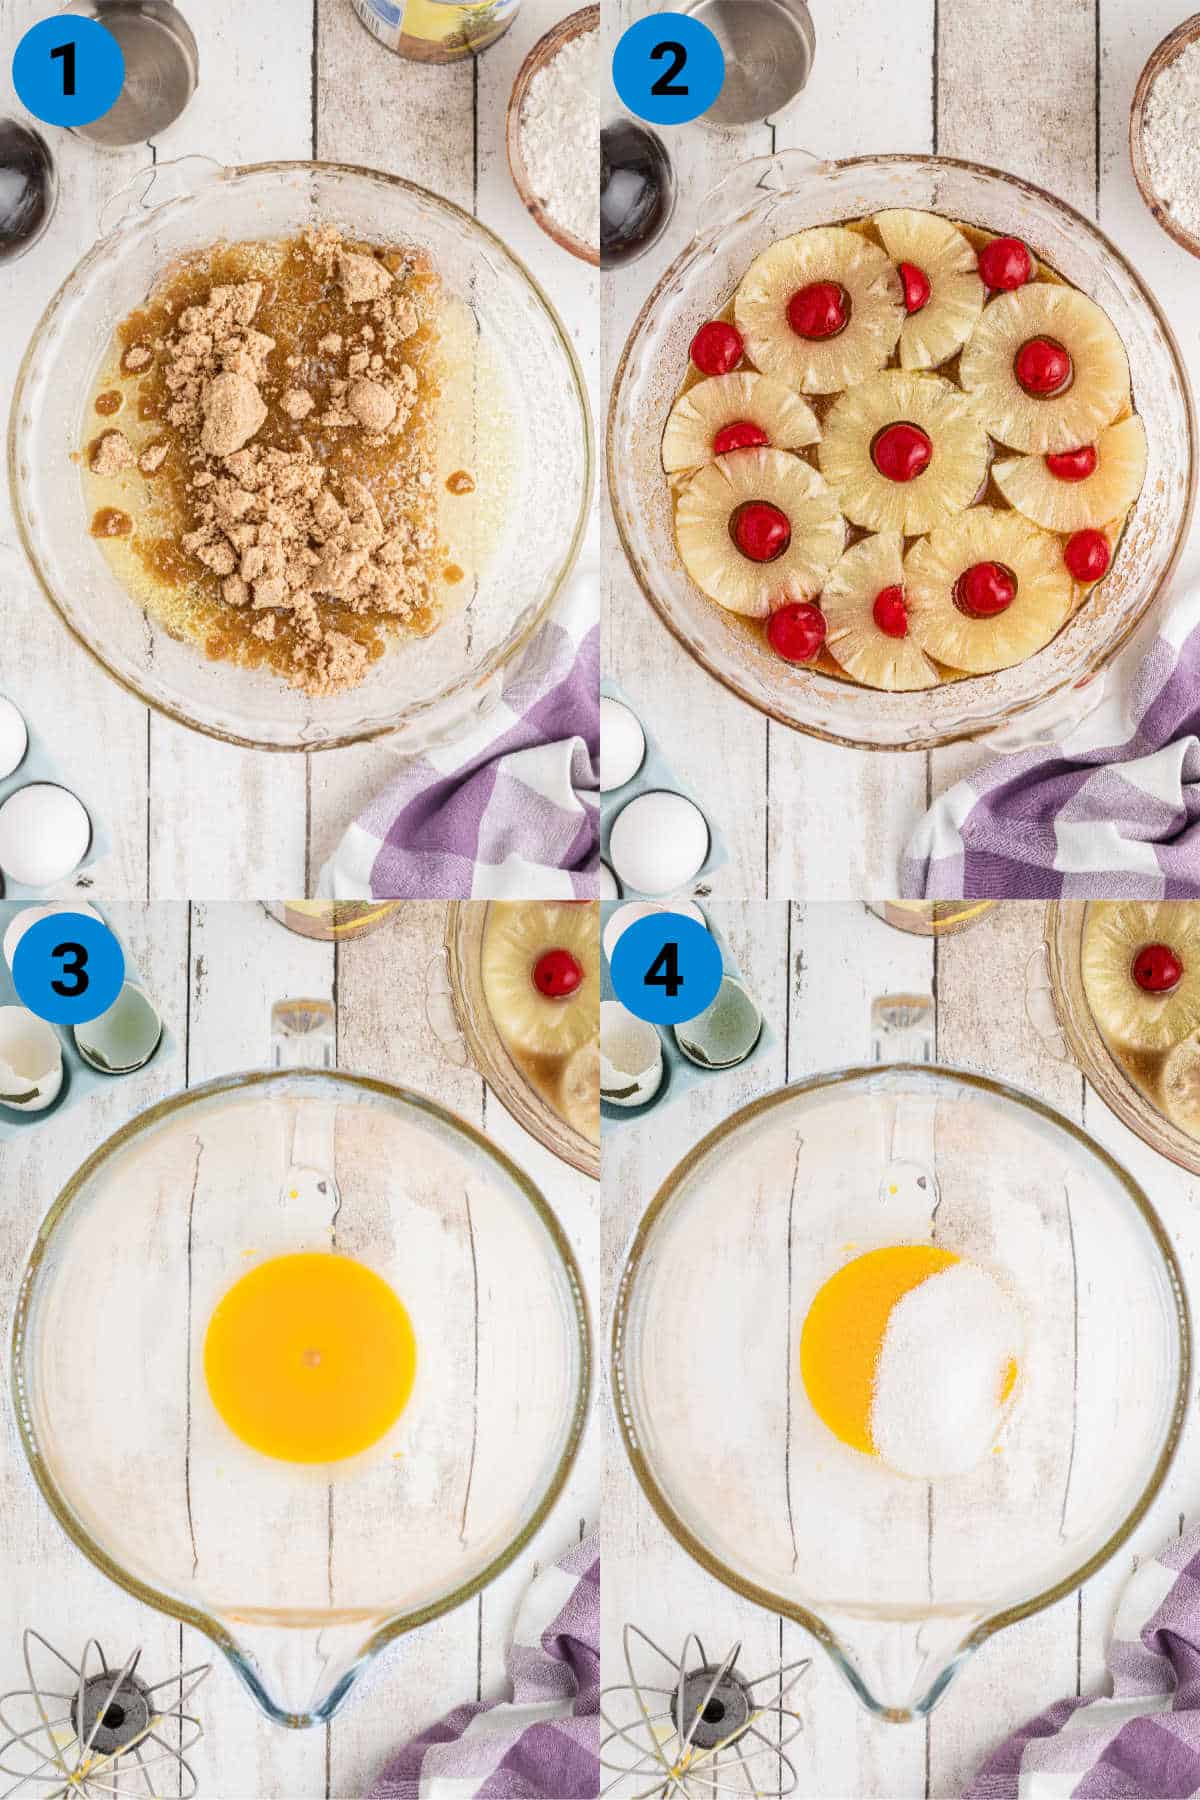 A collage of four images showing how to make a pineapple upside down cake, steps 1-4.